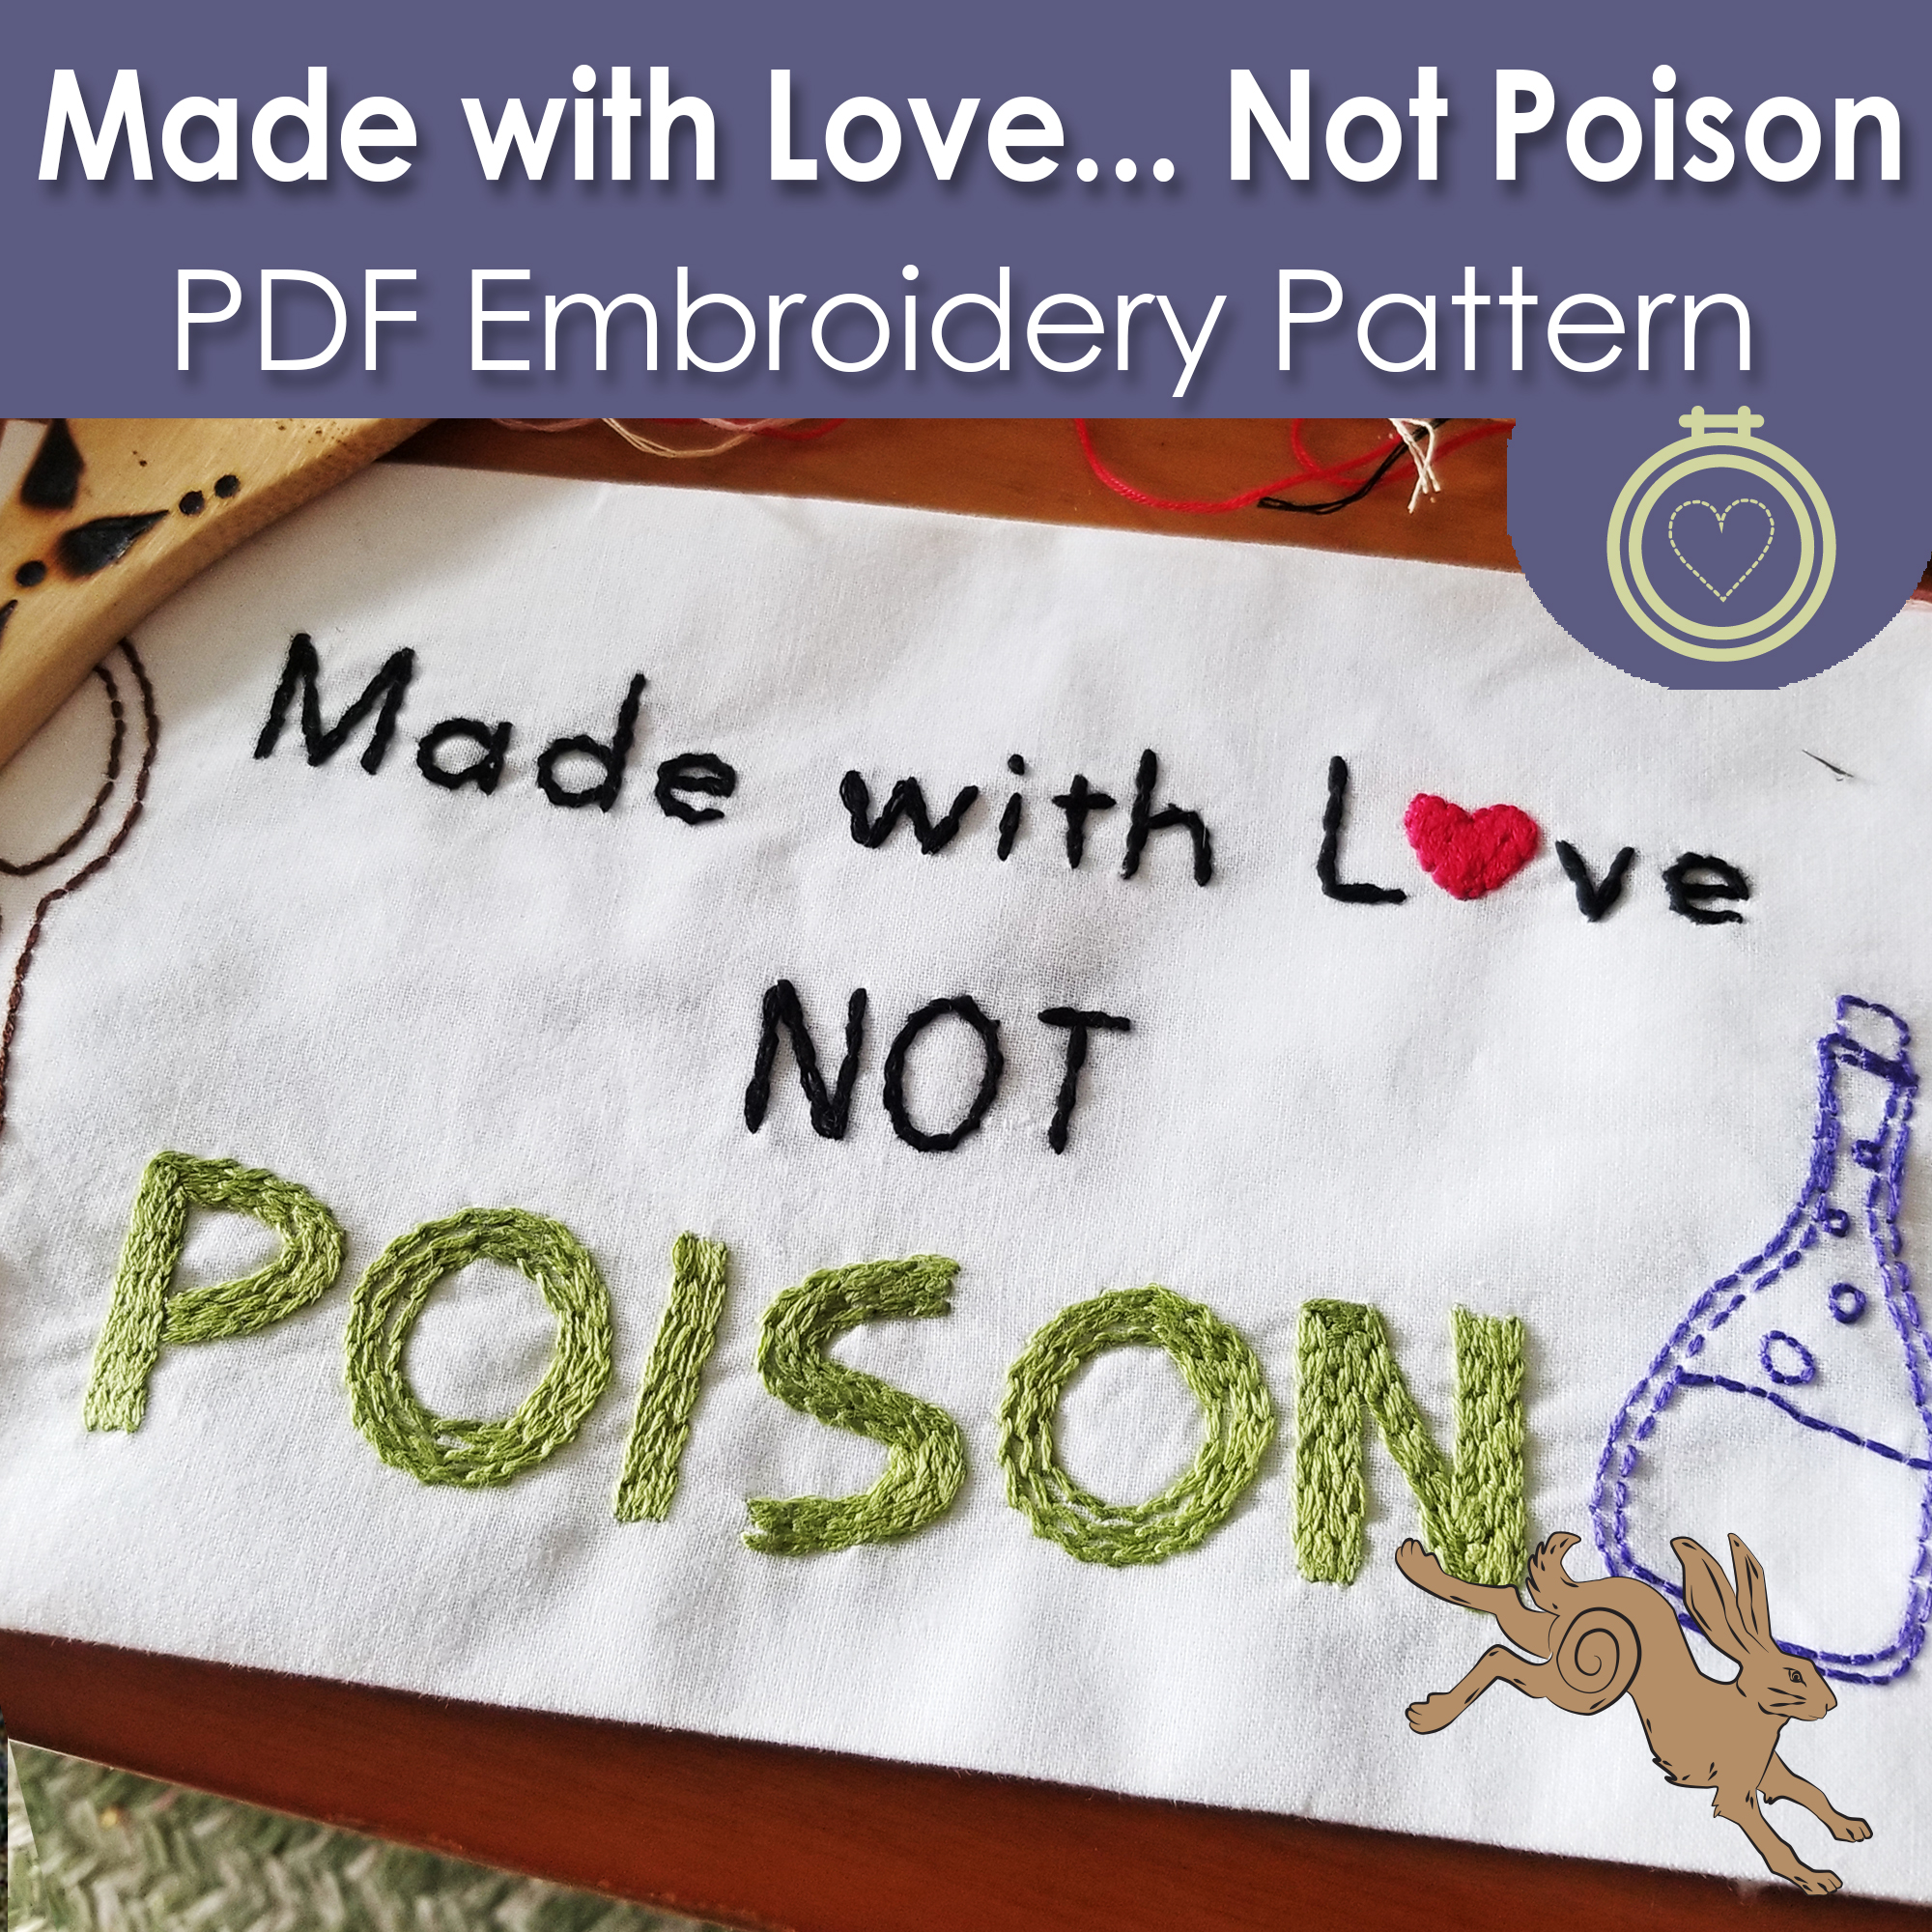 Made with LovMade with Love, not poison embroidery patter from Muse of the Morninge, not poison embroidery patter from Muse of the Morning